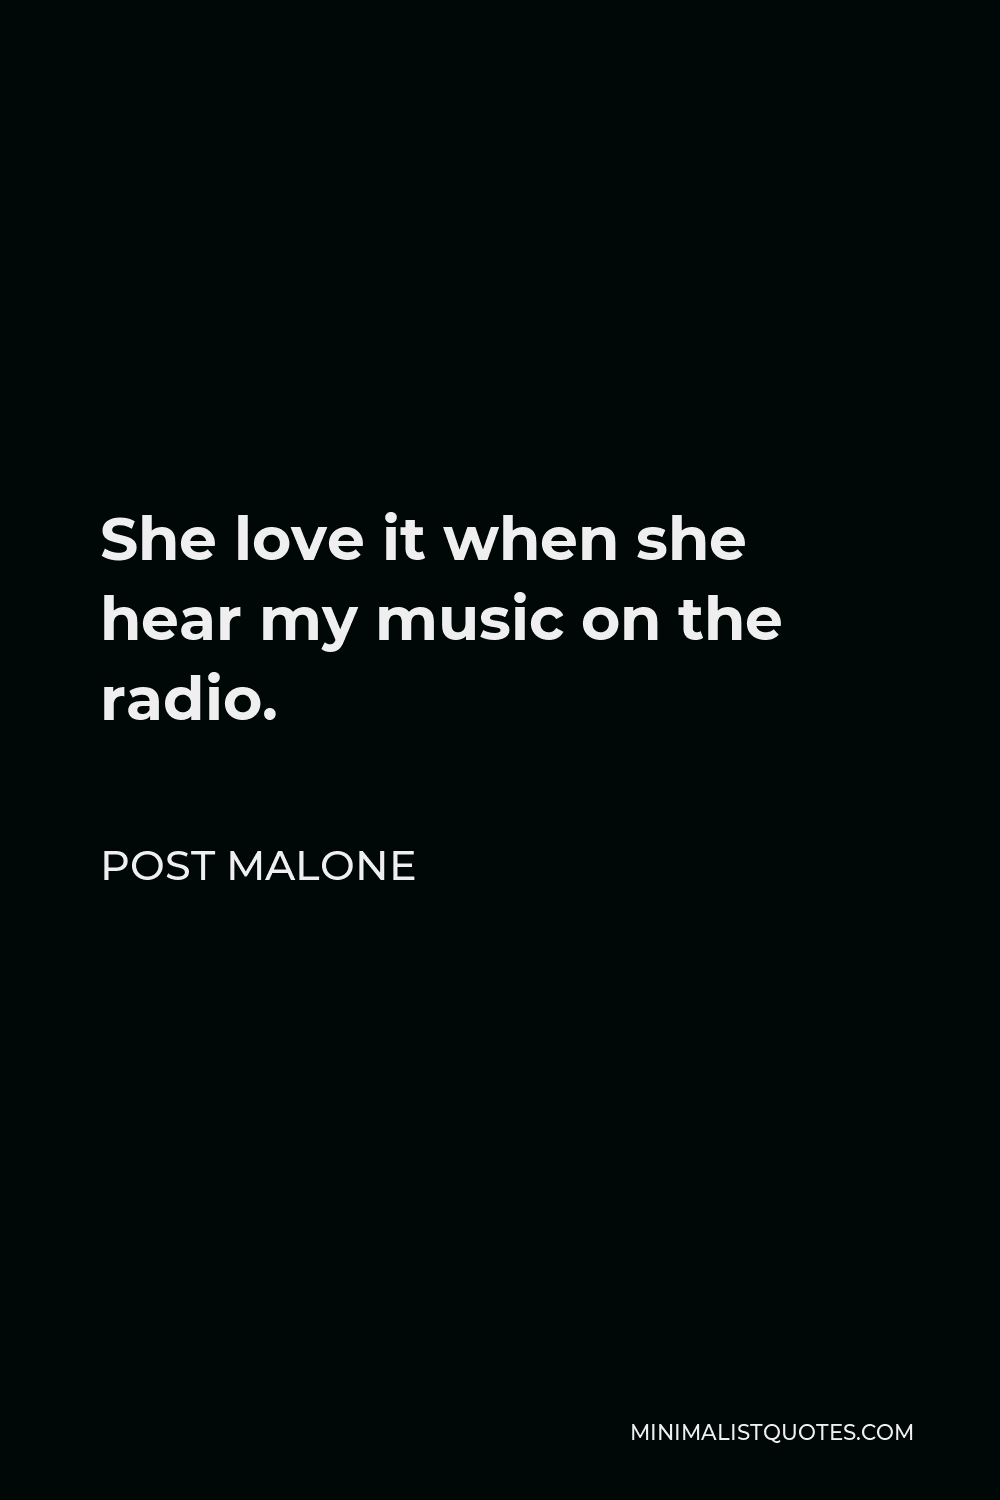 Post Malone Quote - She love it when she hear my music on the radio.